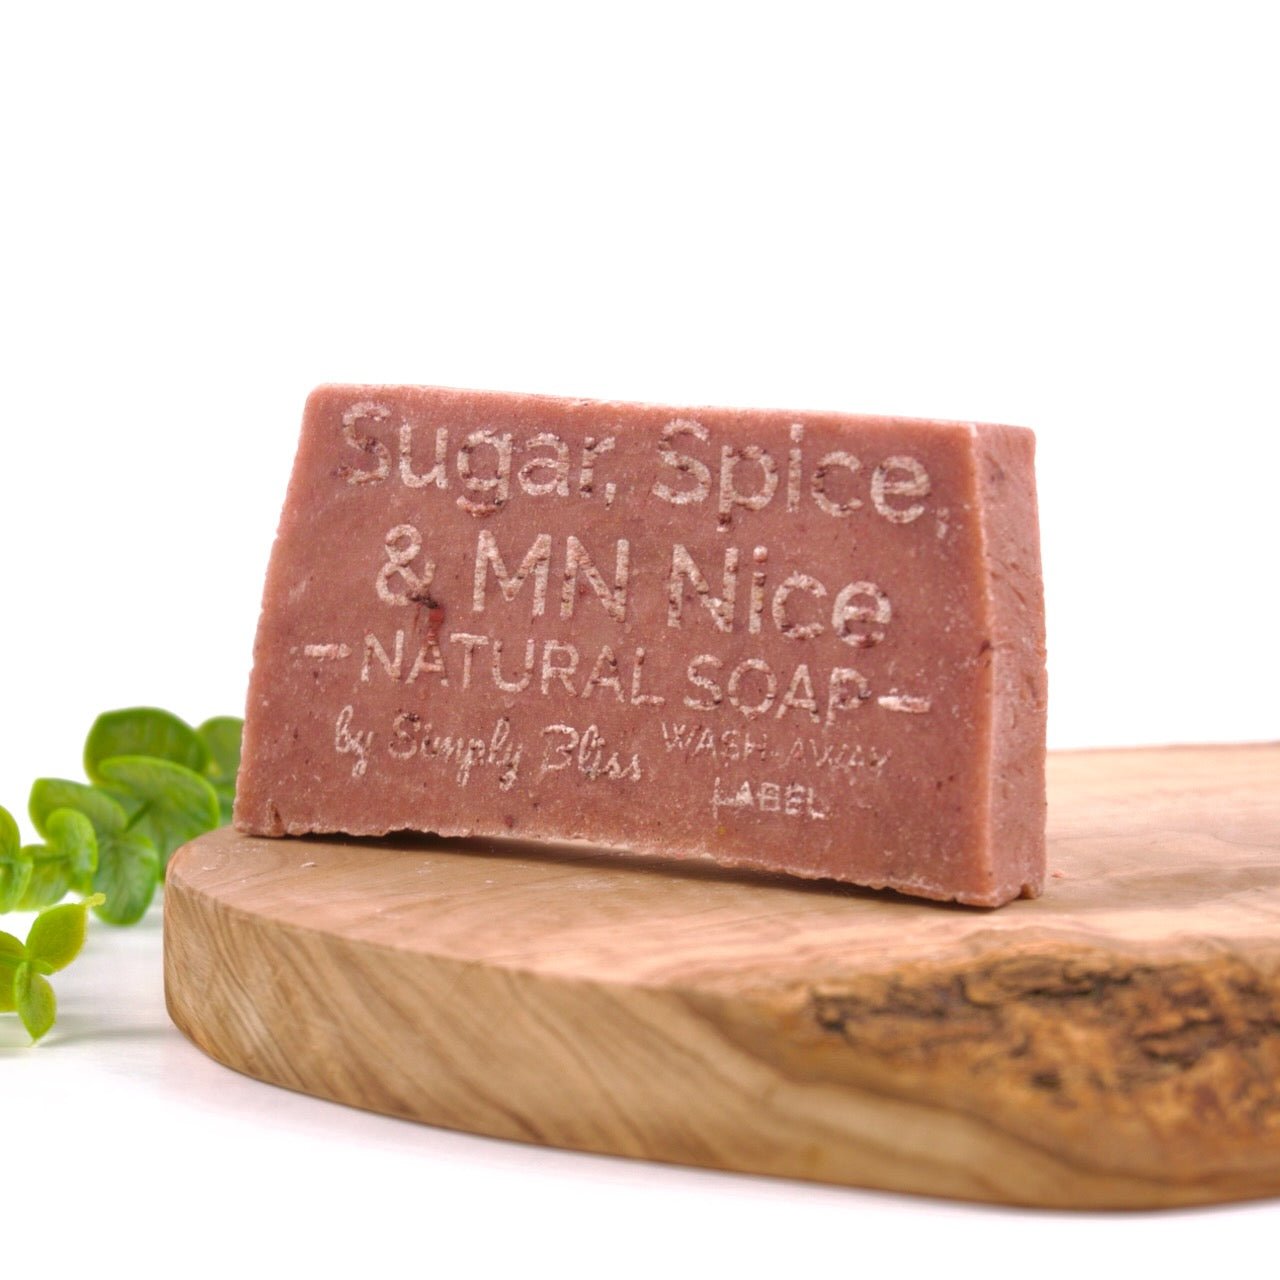 Sugar, Spice, and MN Nice (Chipotle Caramel) Bar Soap - Simply Bliss